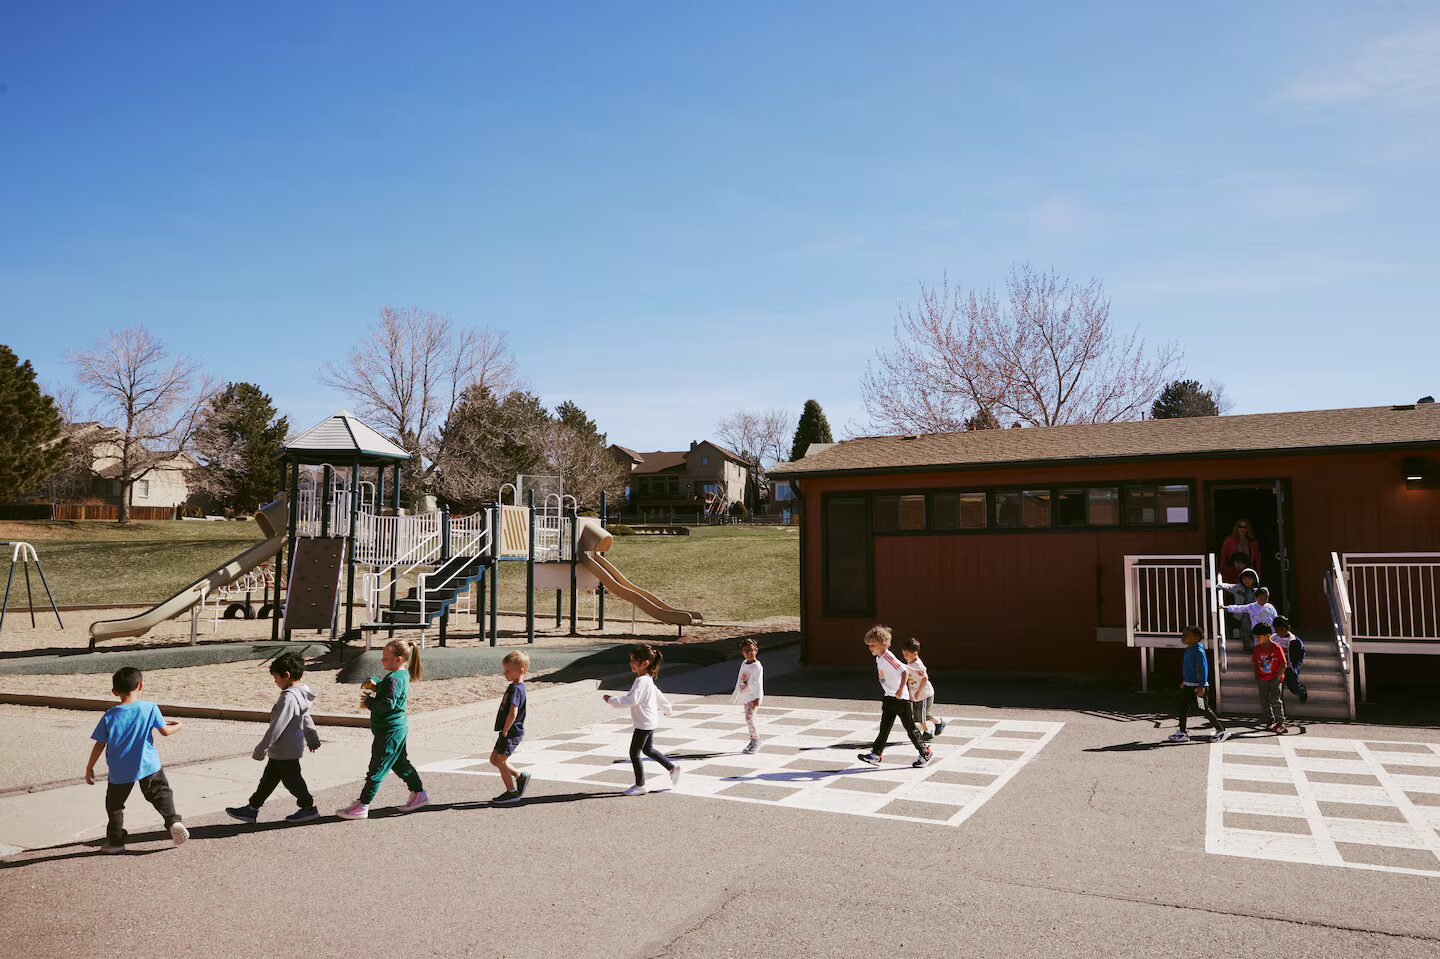 Colorado public preschool: Several preschool children exiting a brown bungalow classroom building going down steps, then walking across an asphalt area with a playground gym on the background.